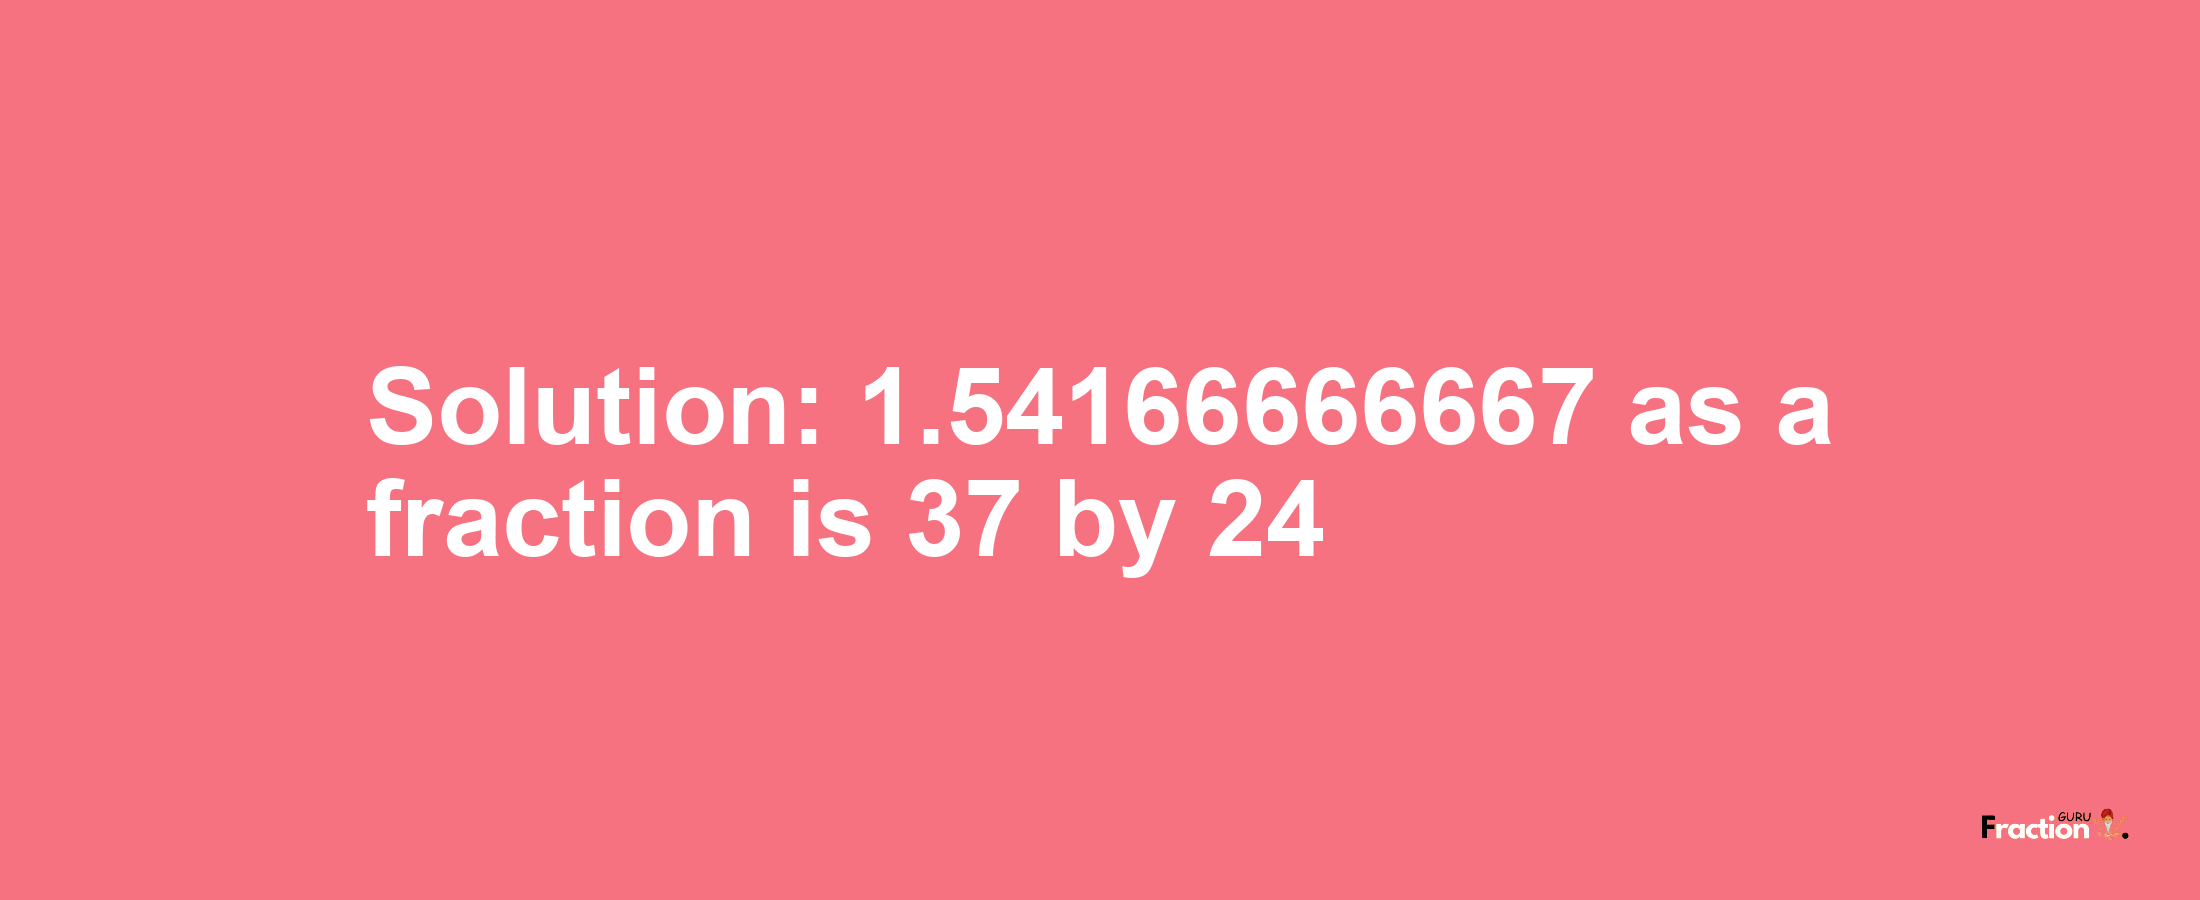 Solution:1.54166666667 as a fraction is 37/24